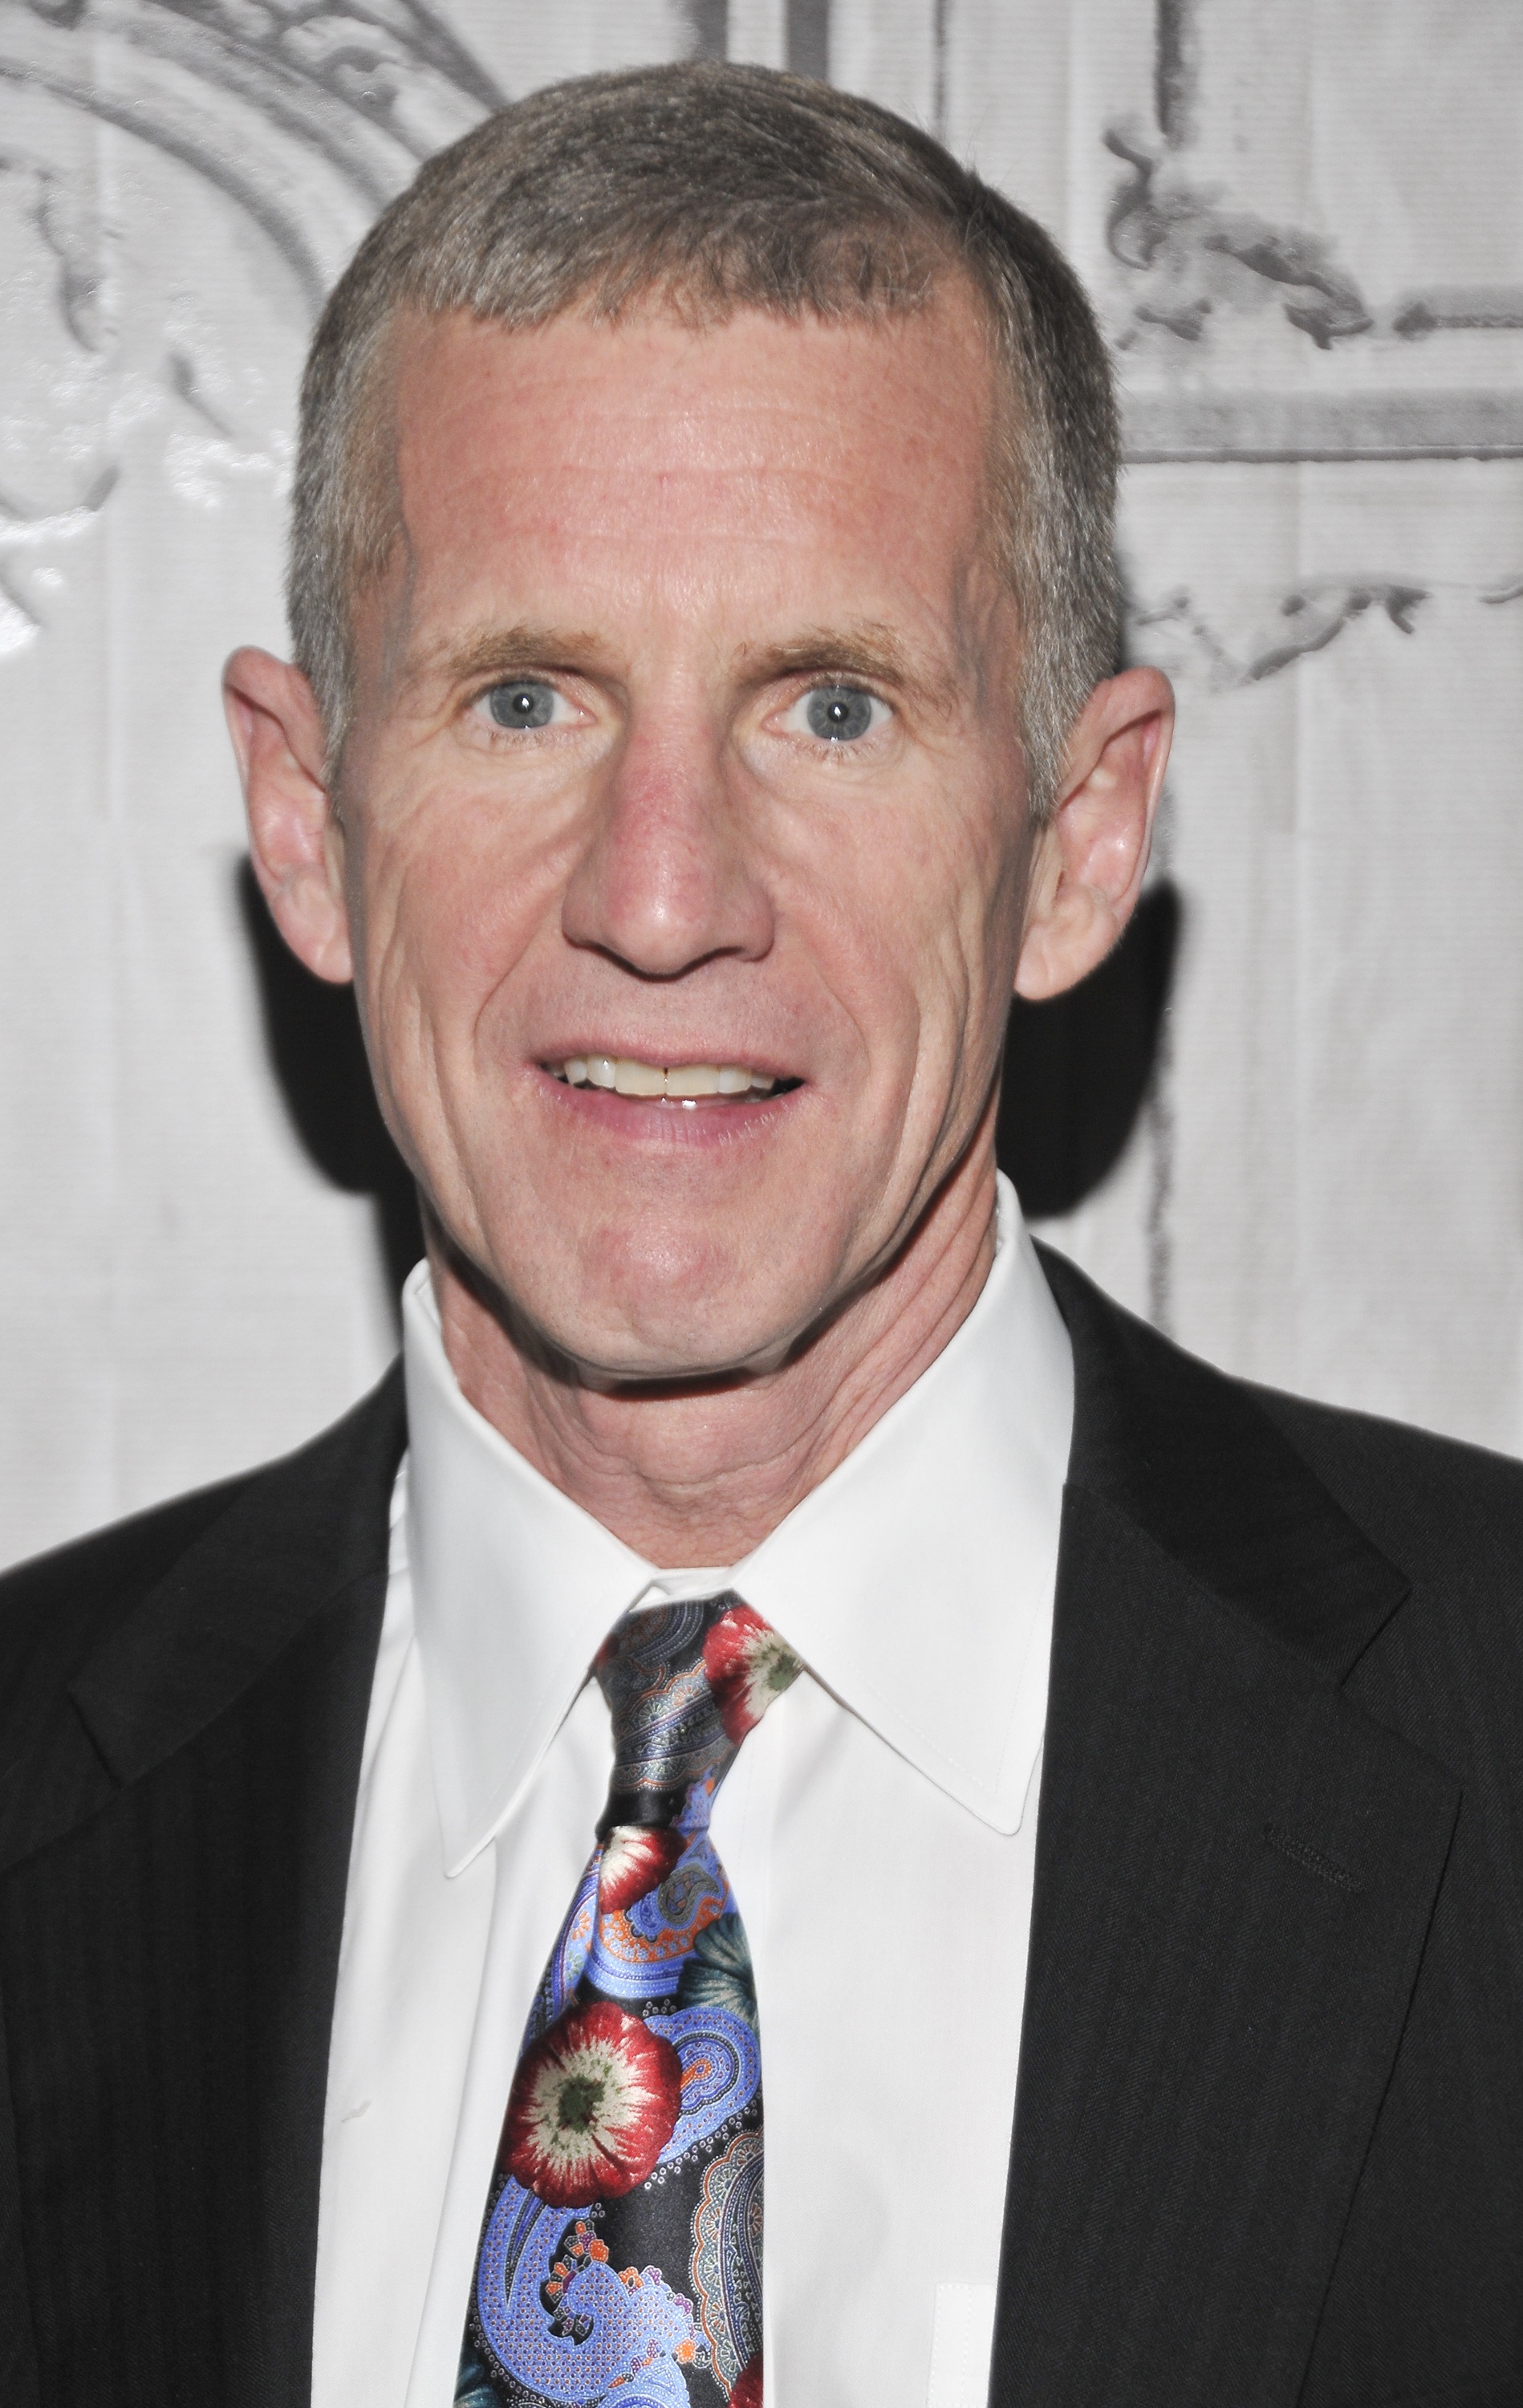 General Stanley McChrystal attends AOL Build Speaker Series at AOL Studios in New York on May 14, 2015.